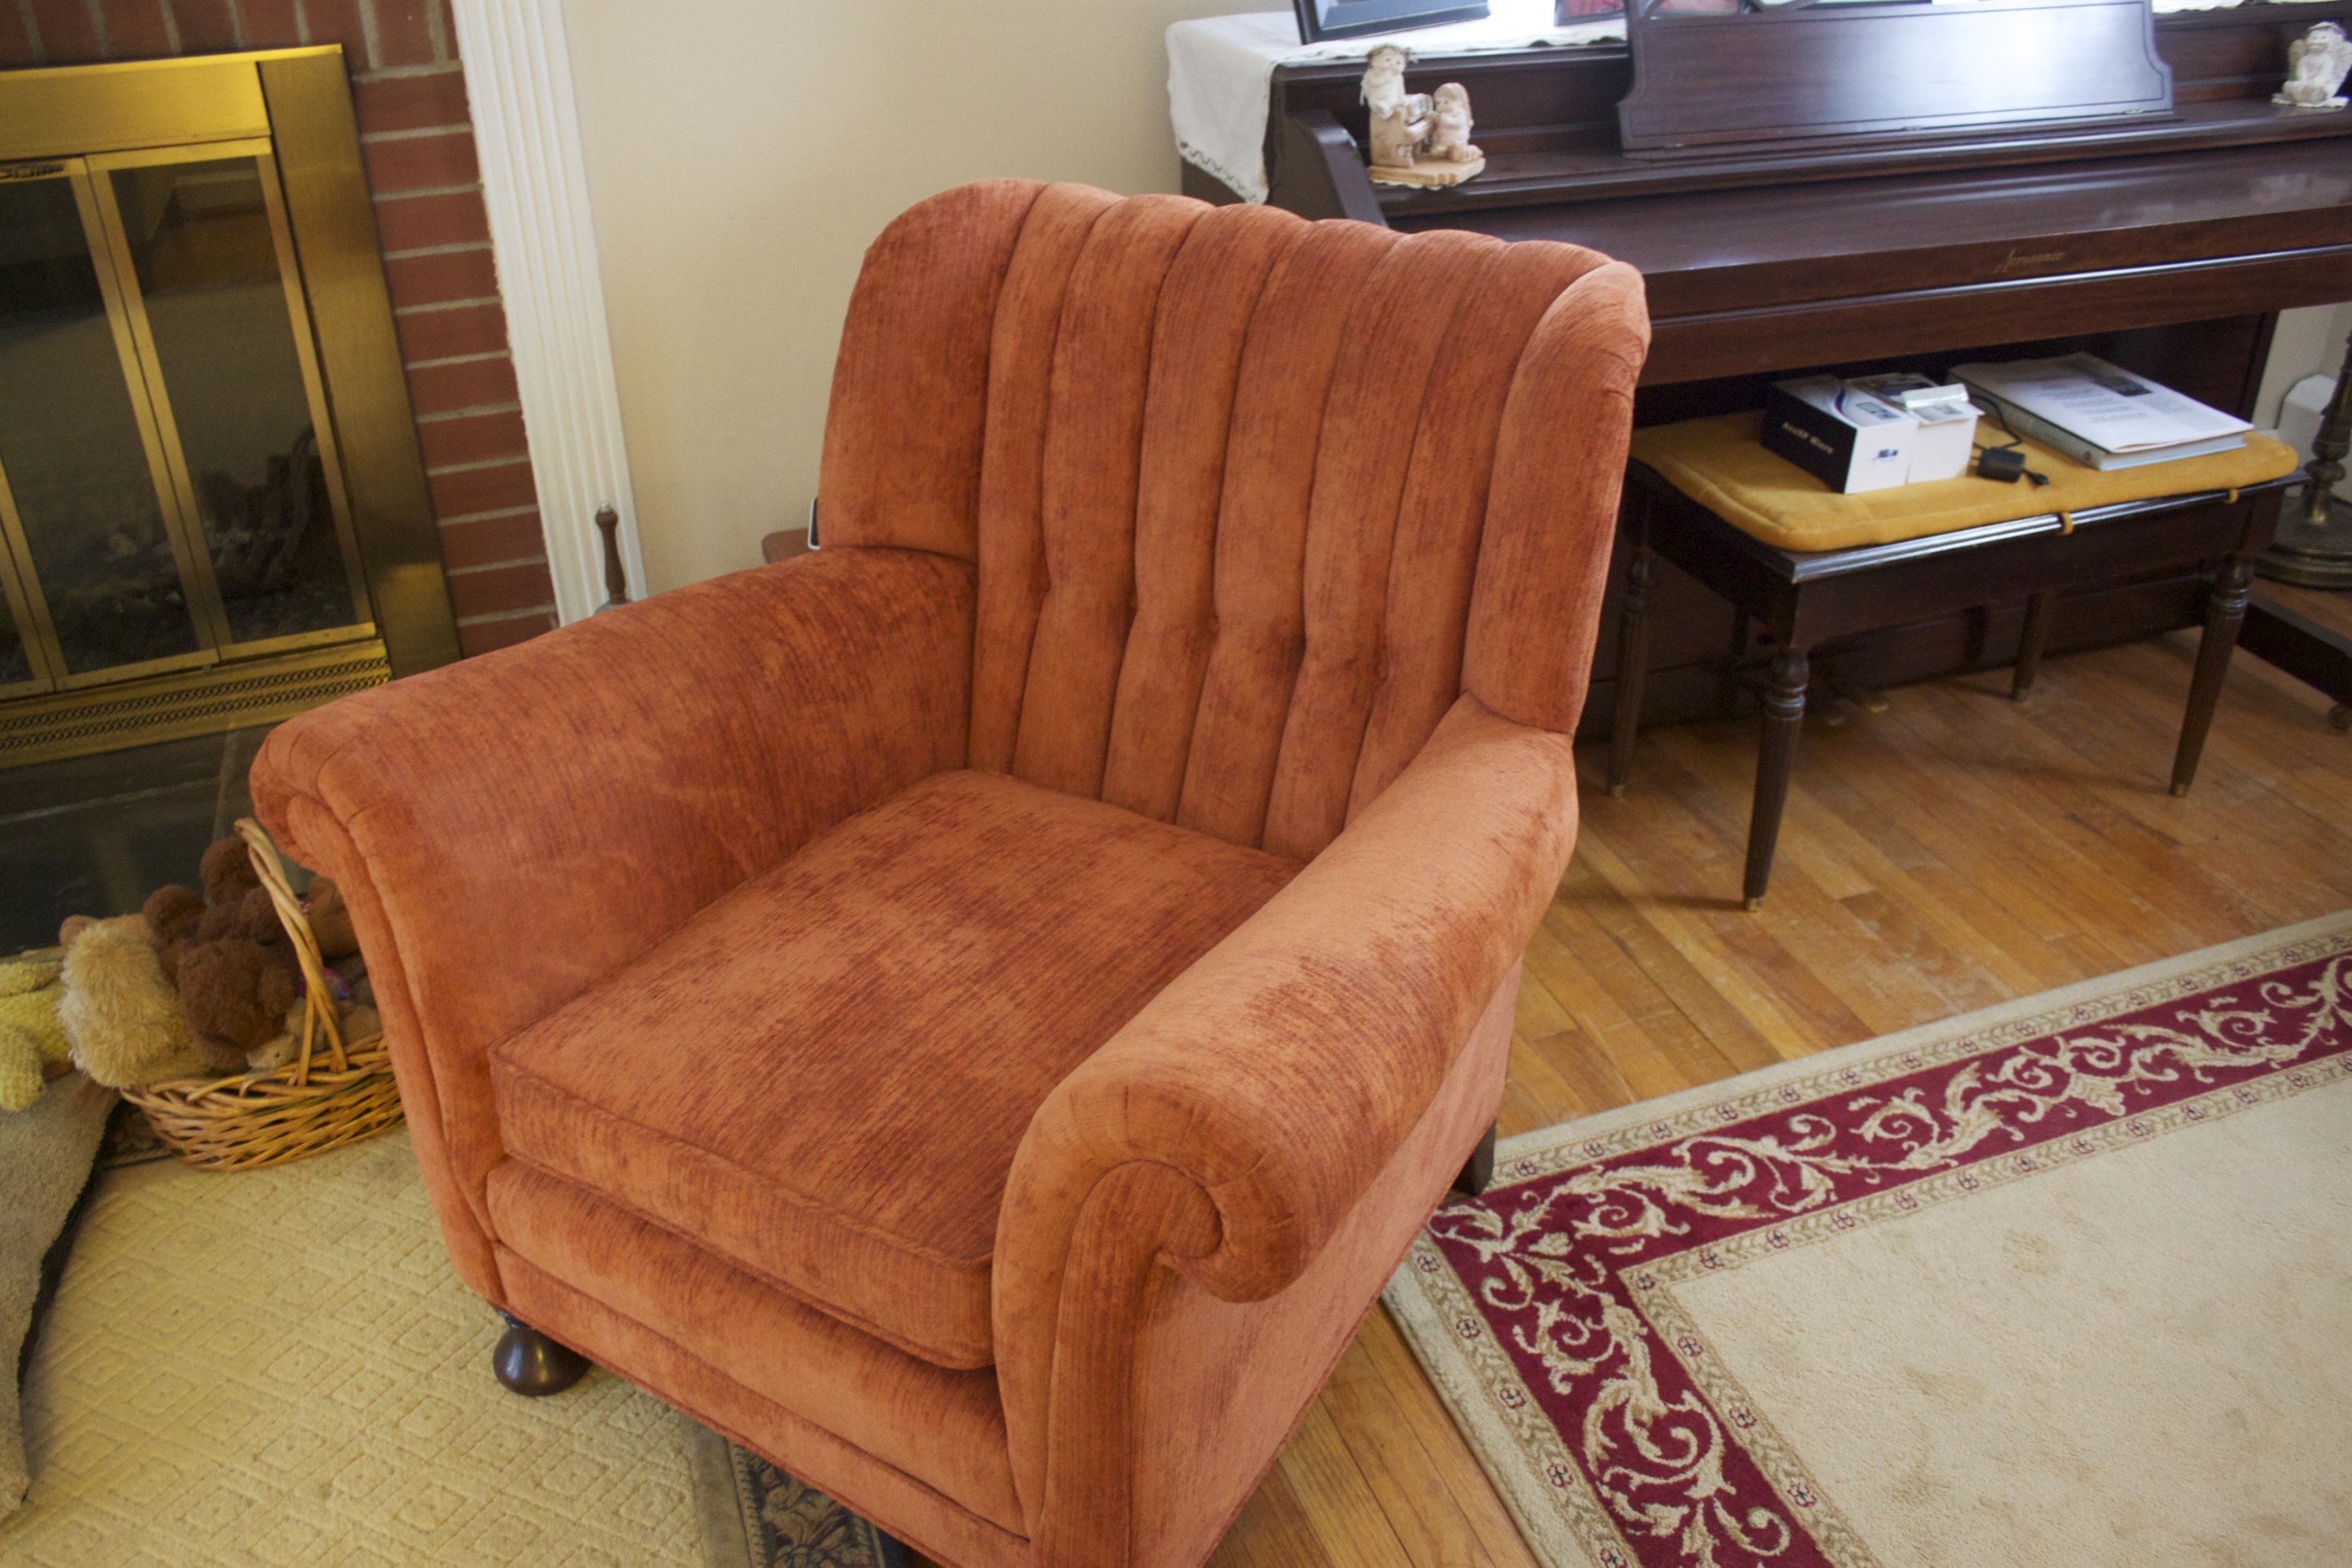 Club Chair with Channels Advanced upholstery project and skill level